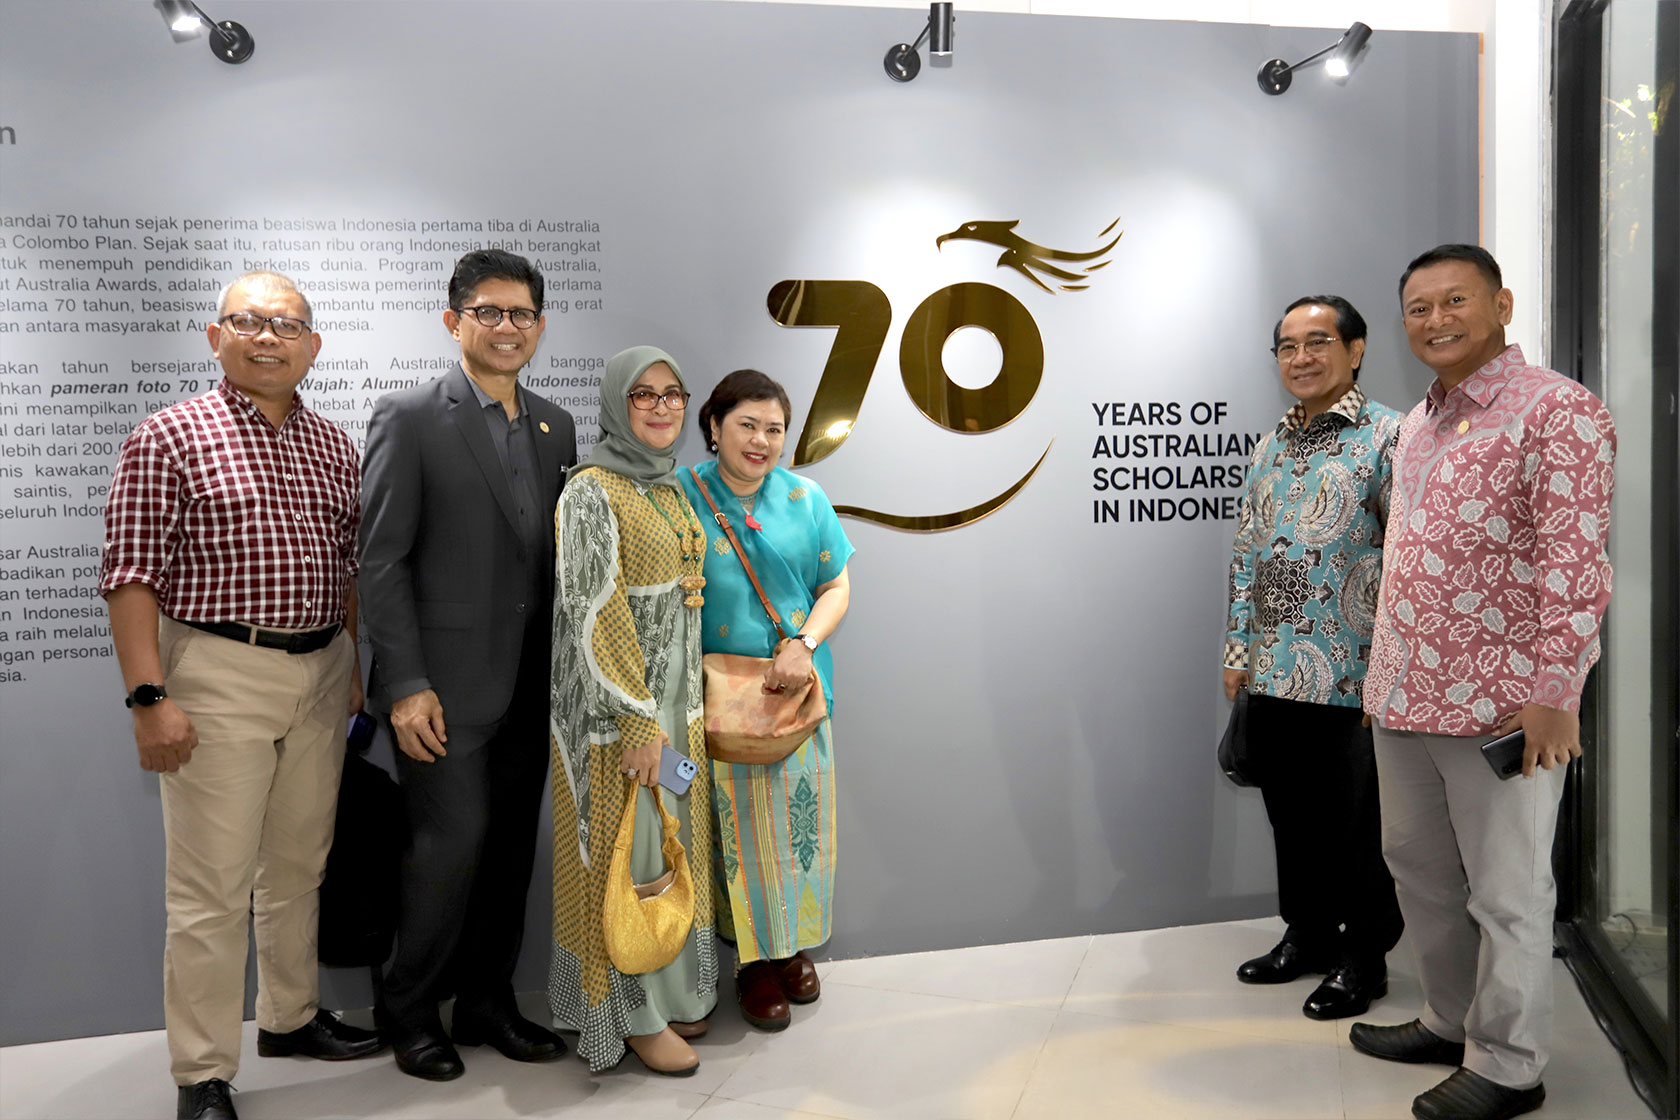 Notable alumni pose for a group photo at the captivating Photo Exhibition.